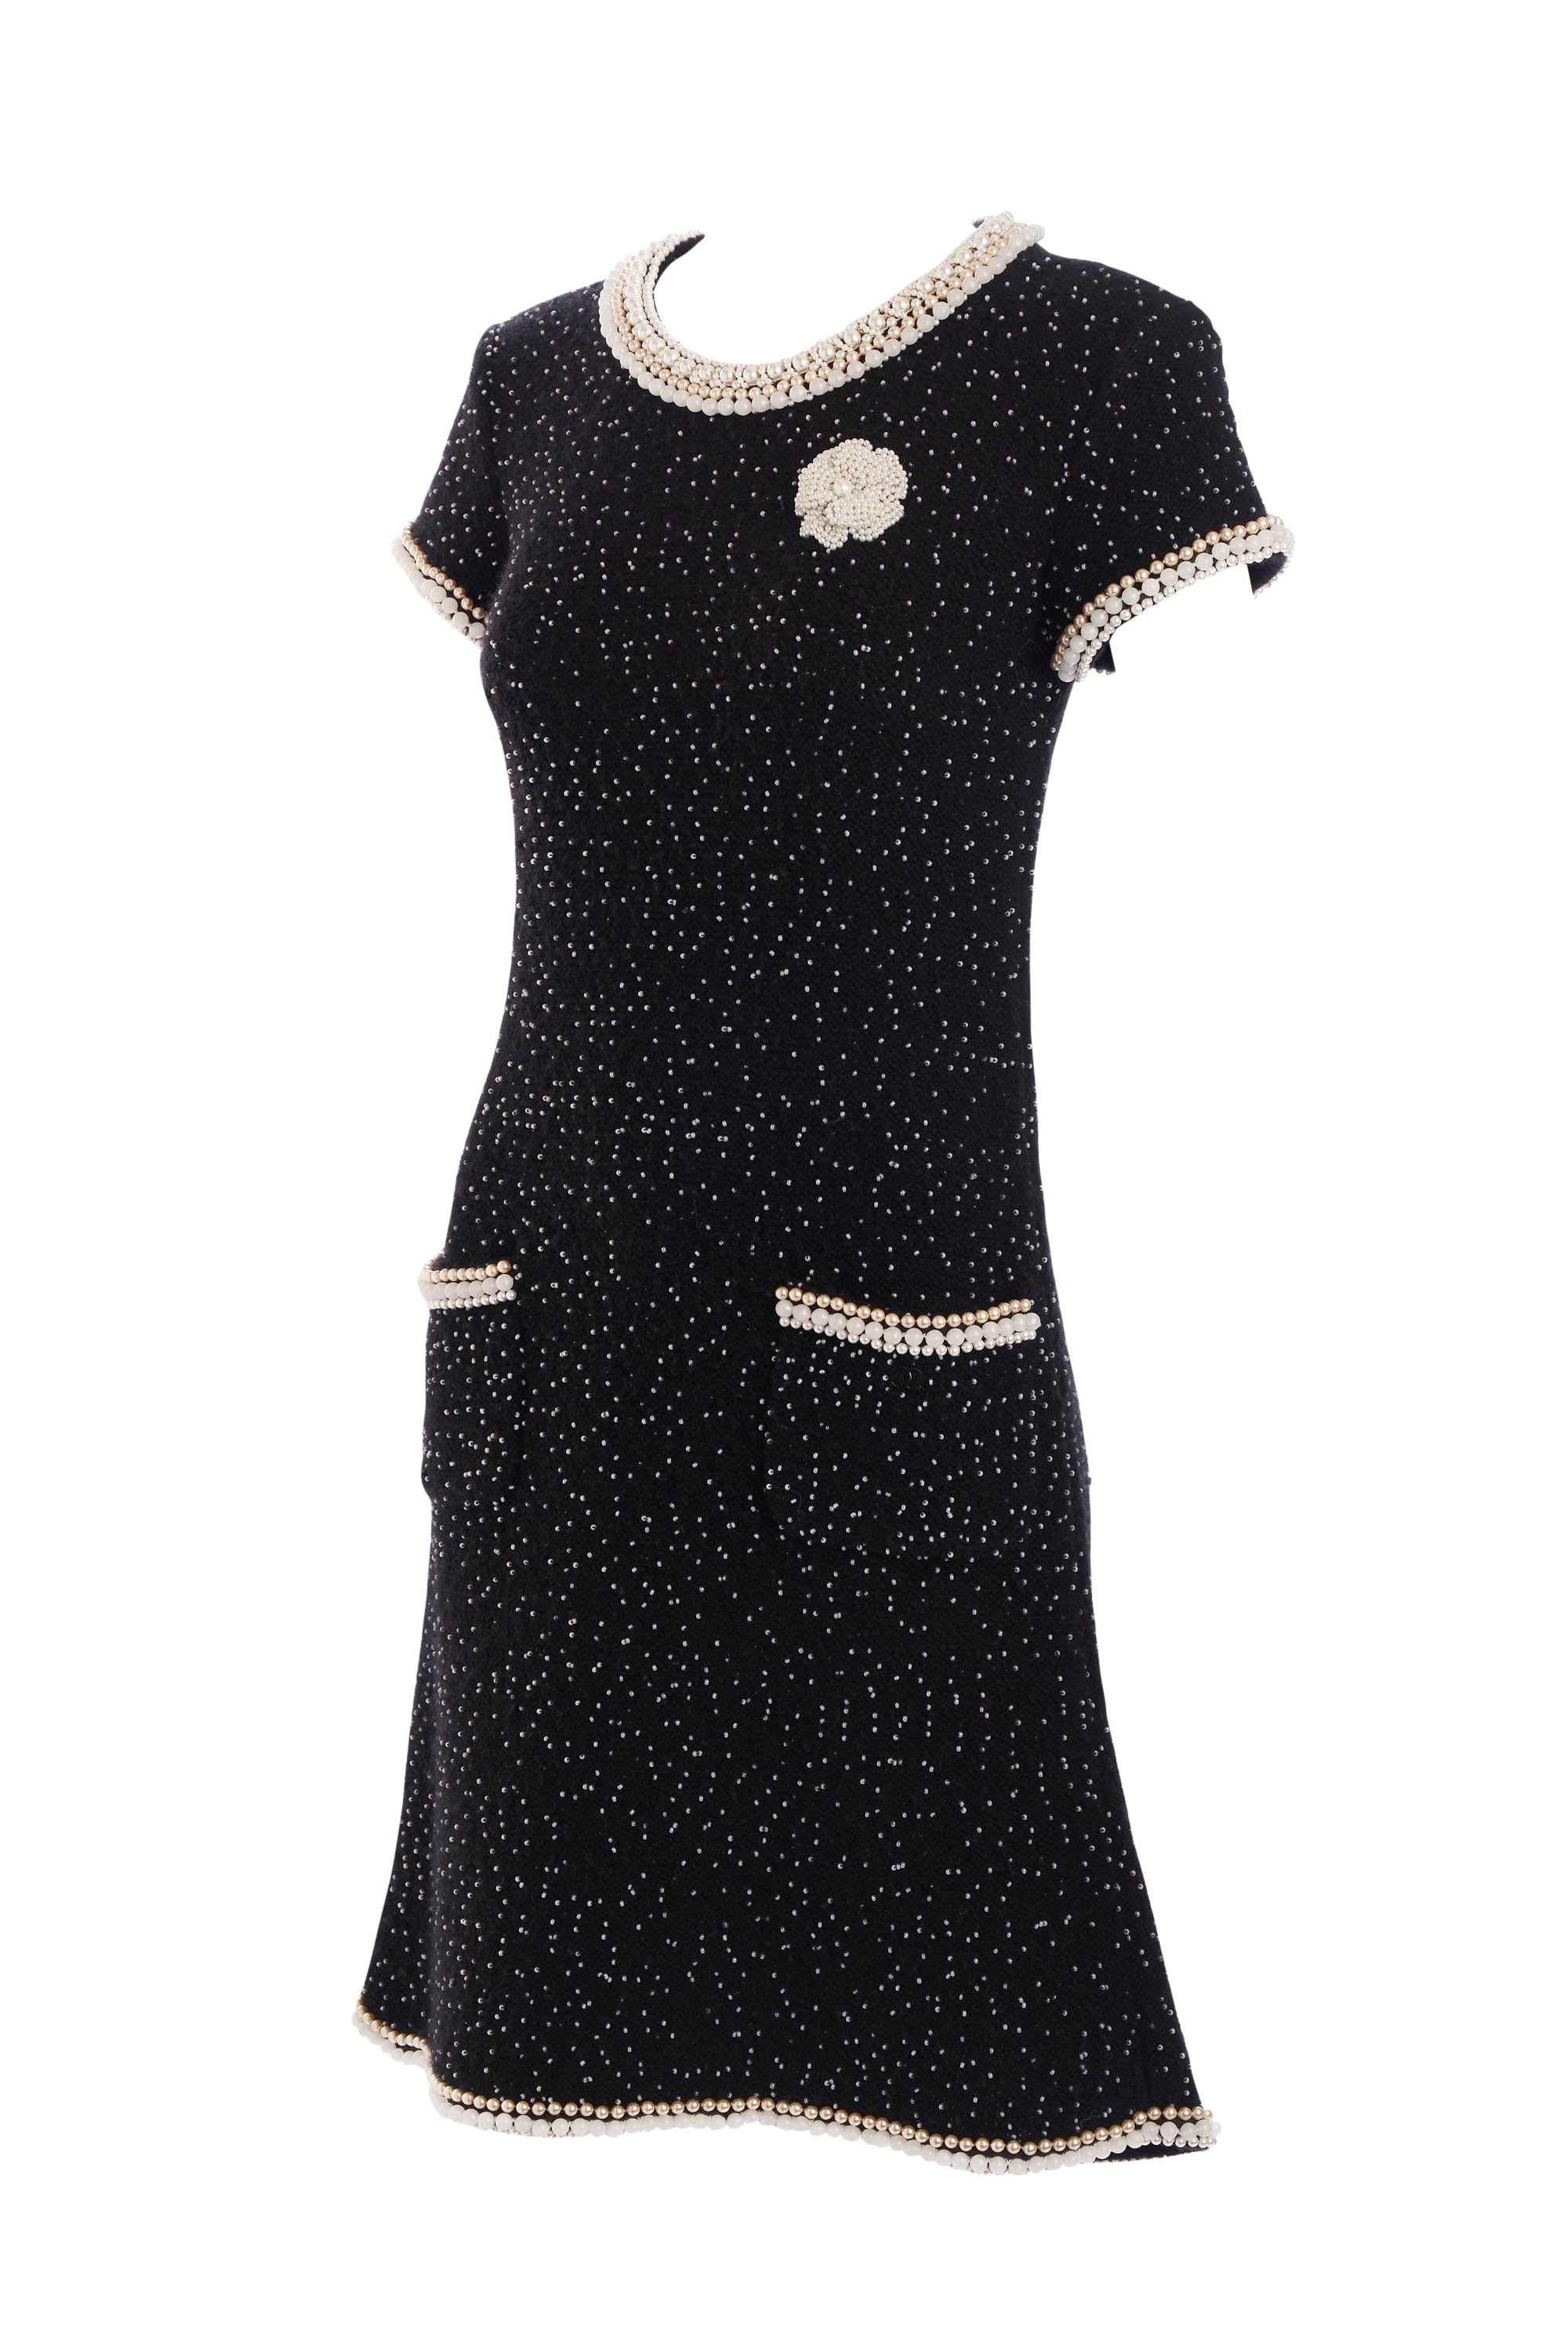 Chanel Black Camelia and Pearl Sleeveless Dress Size 36